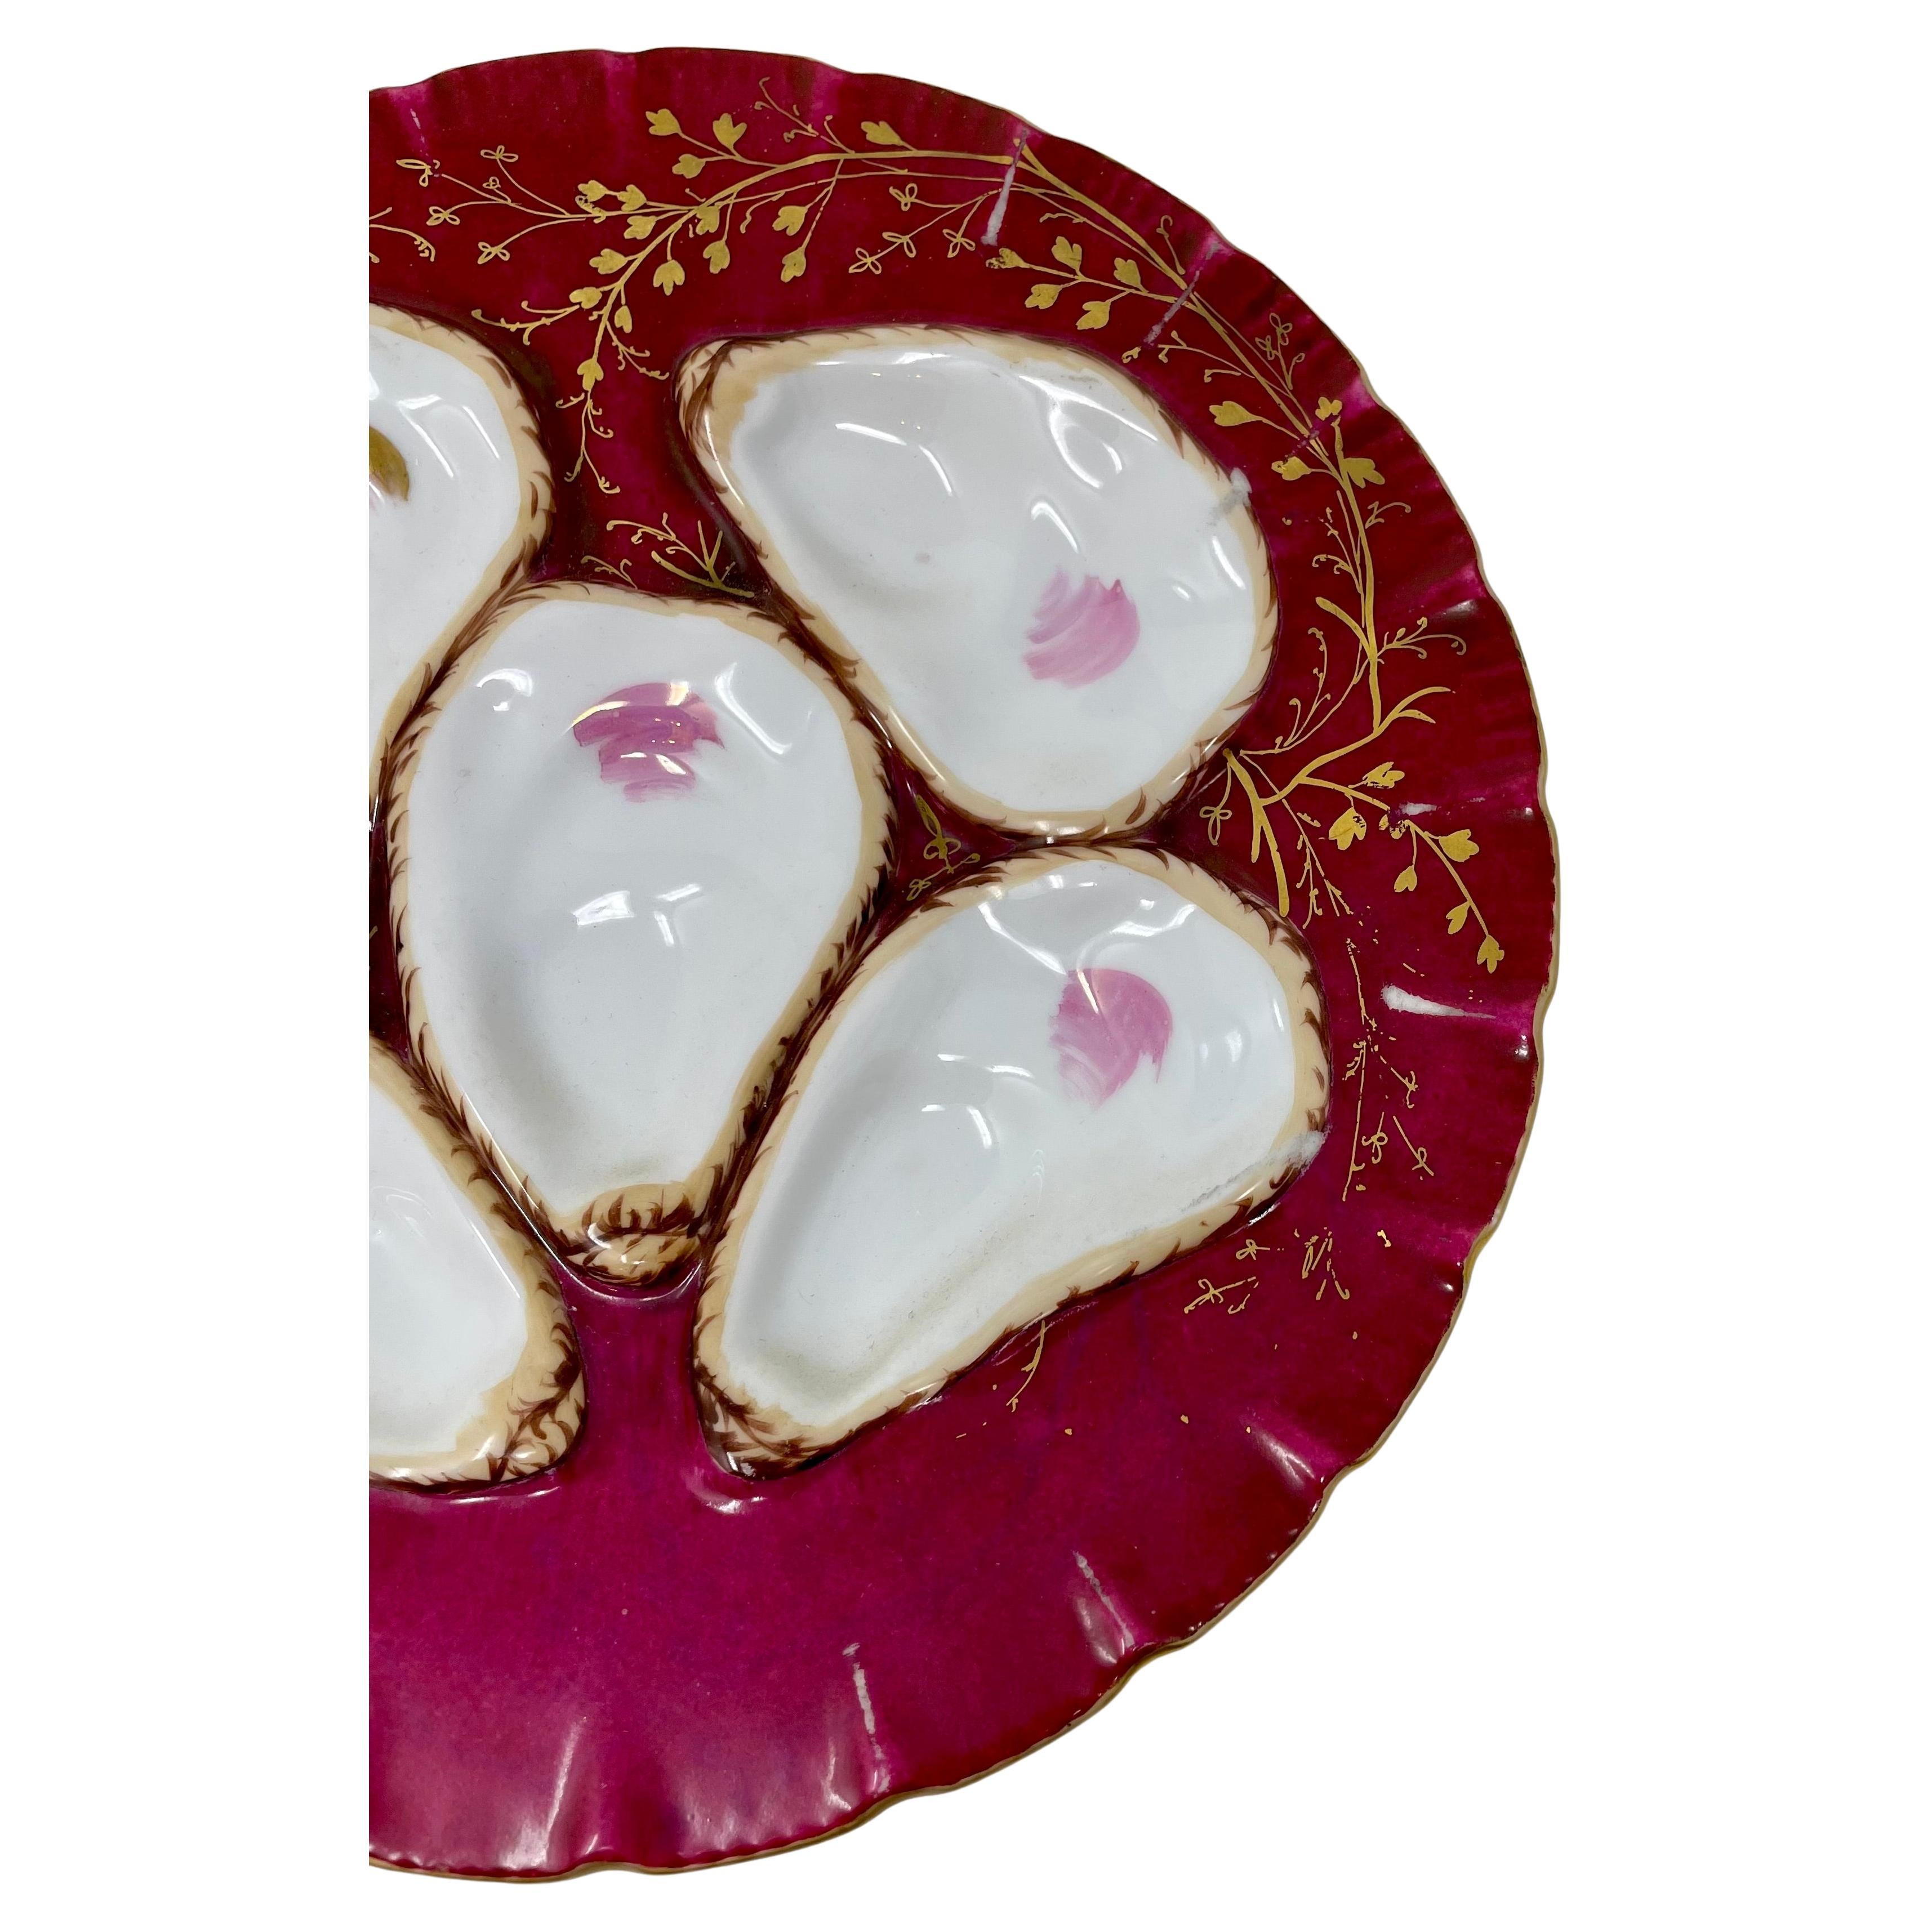 Antique continental porcelain raspberry red & gold oyster plate, circa 1880's.